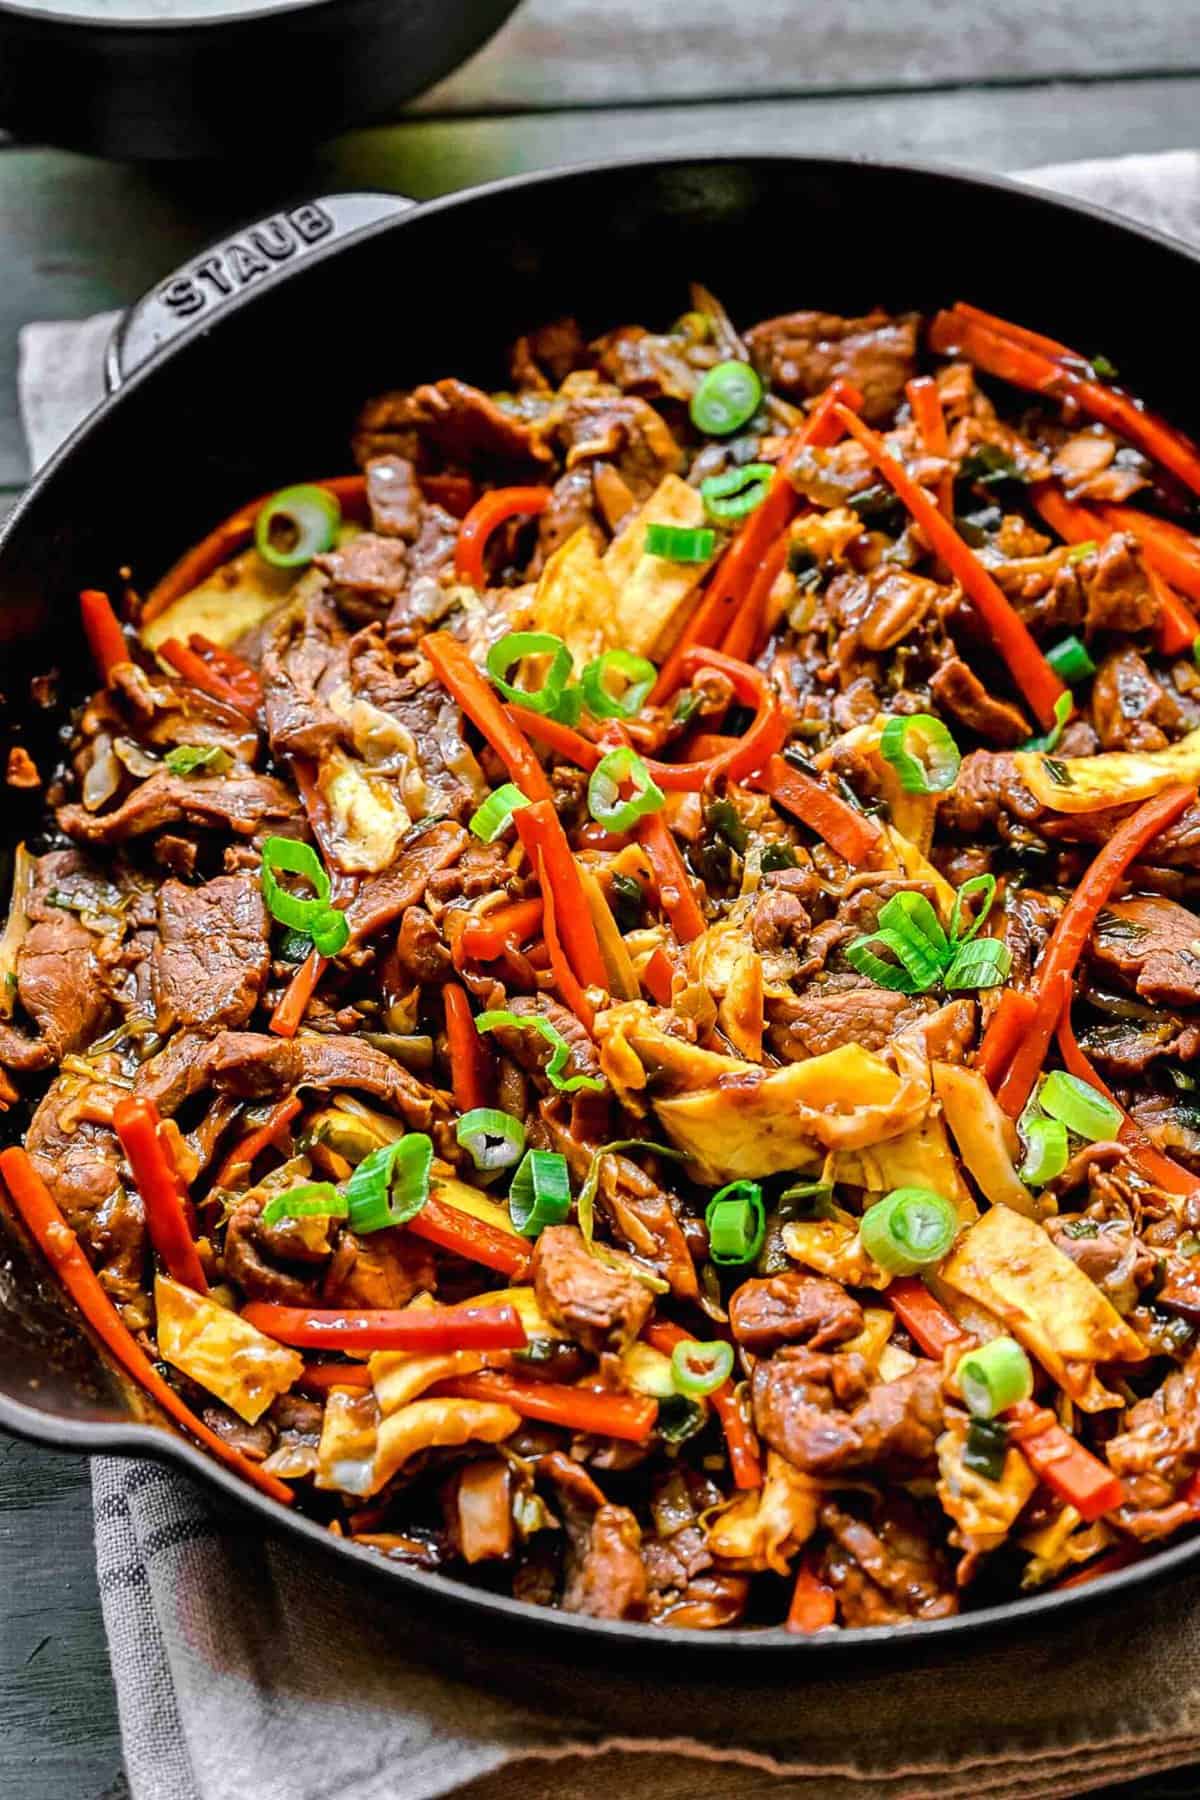 Moo shu pork in a pan ready to be served.